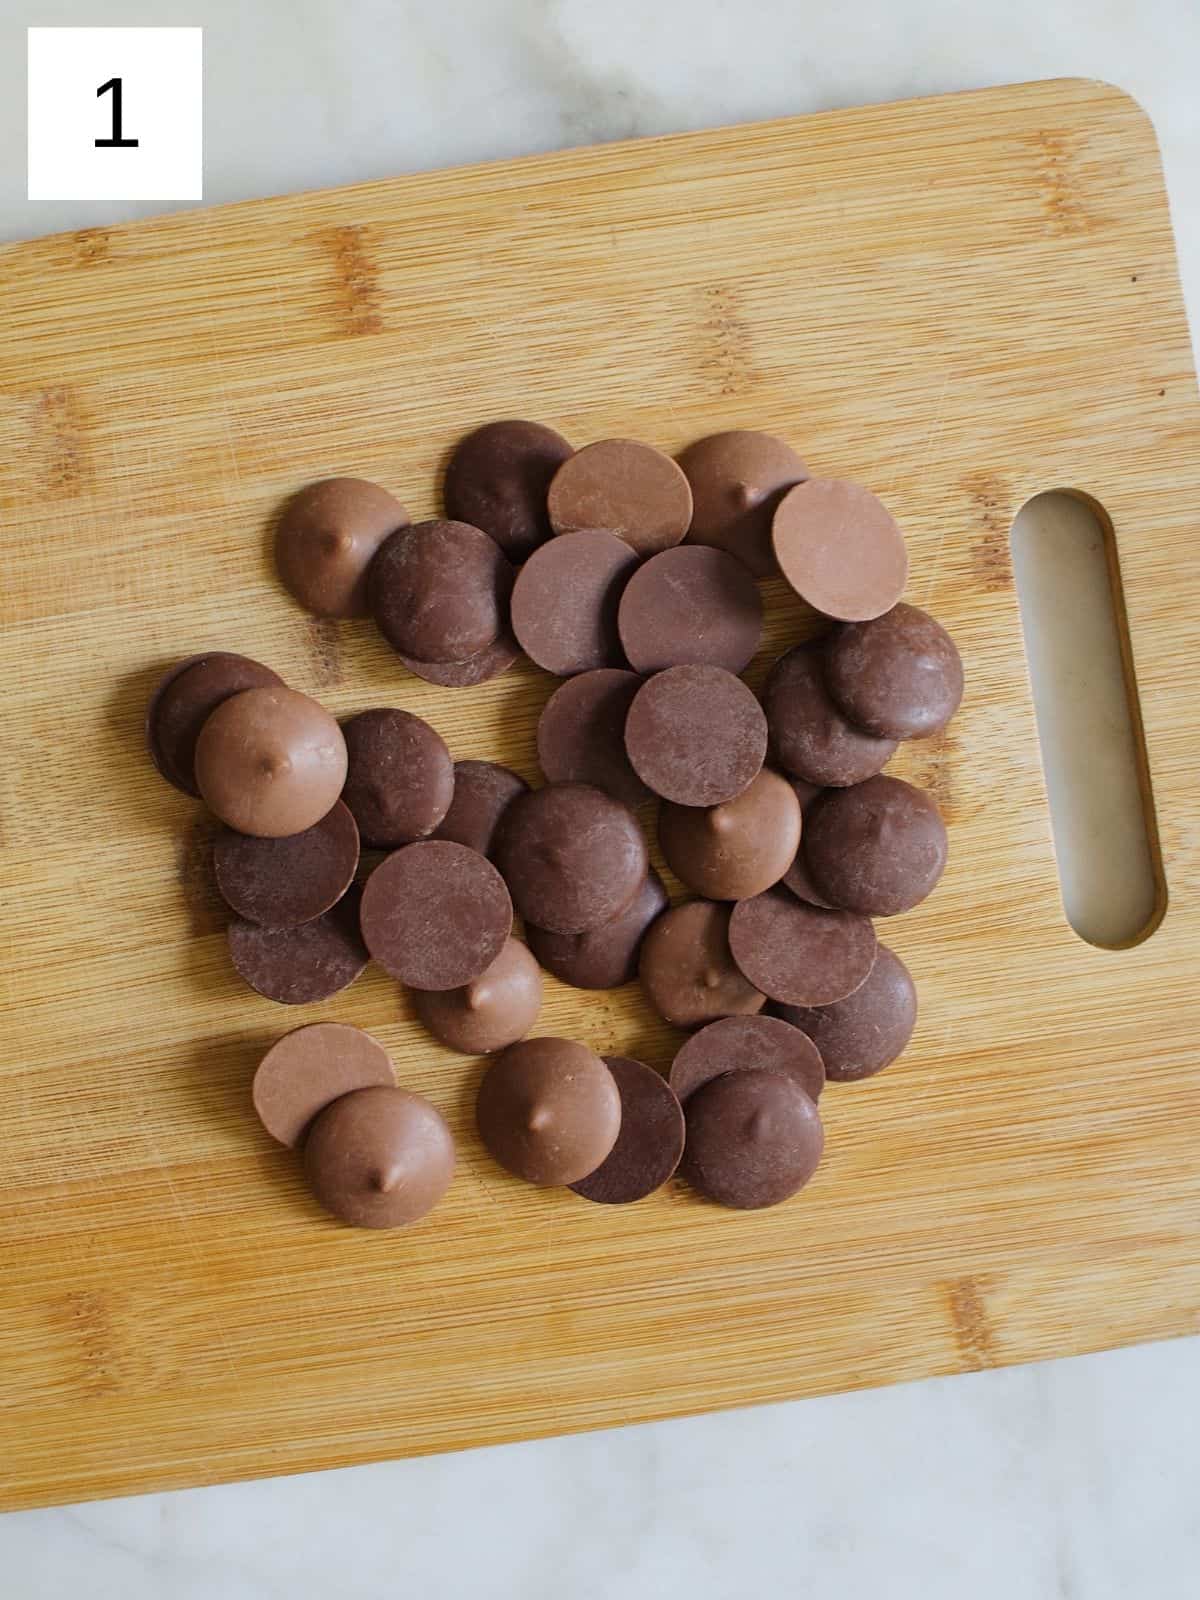 chocolates on a wooden cutting board.